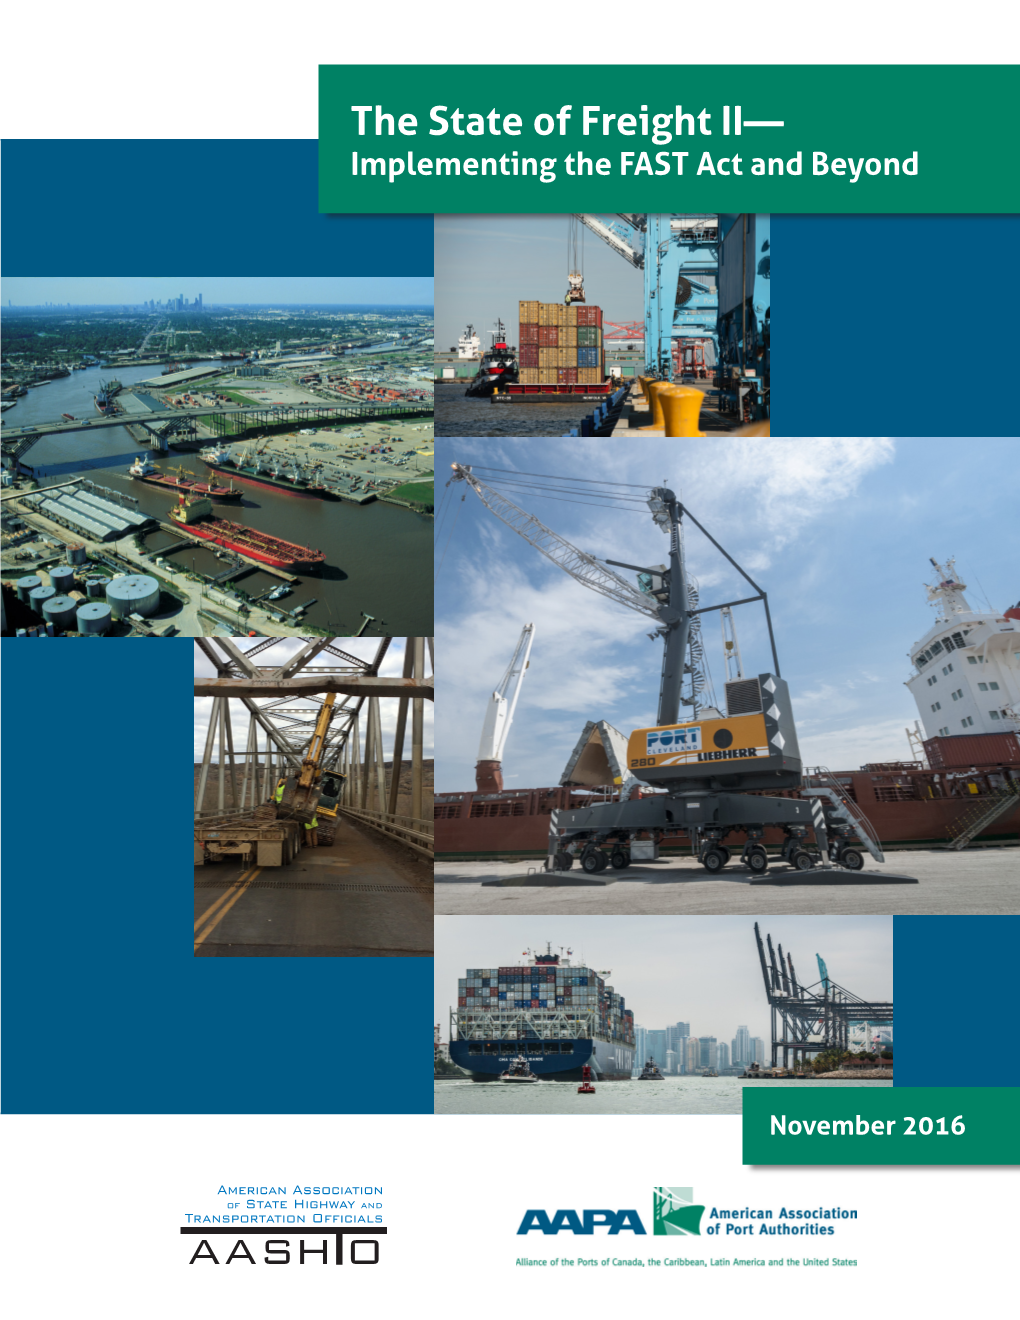 The State of Freight II—Implementing the FAST Act and Beyond